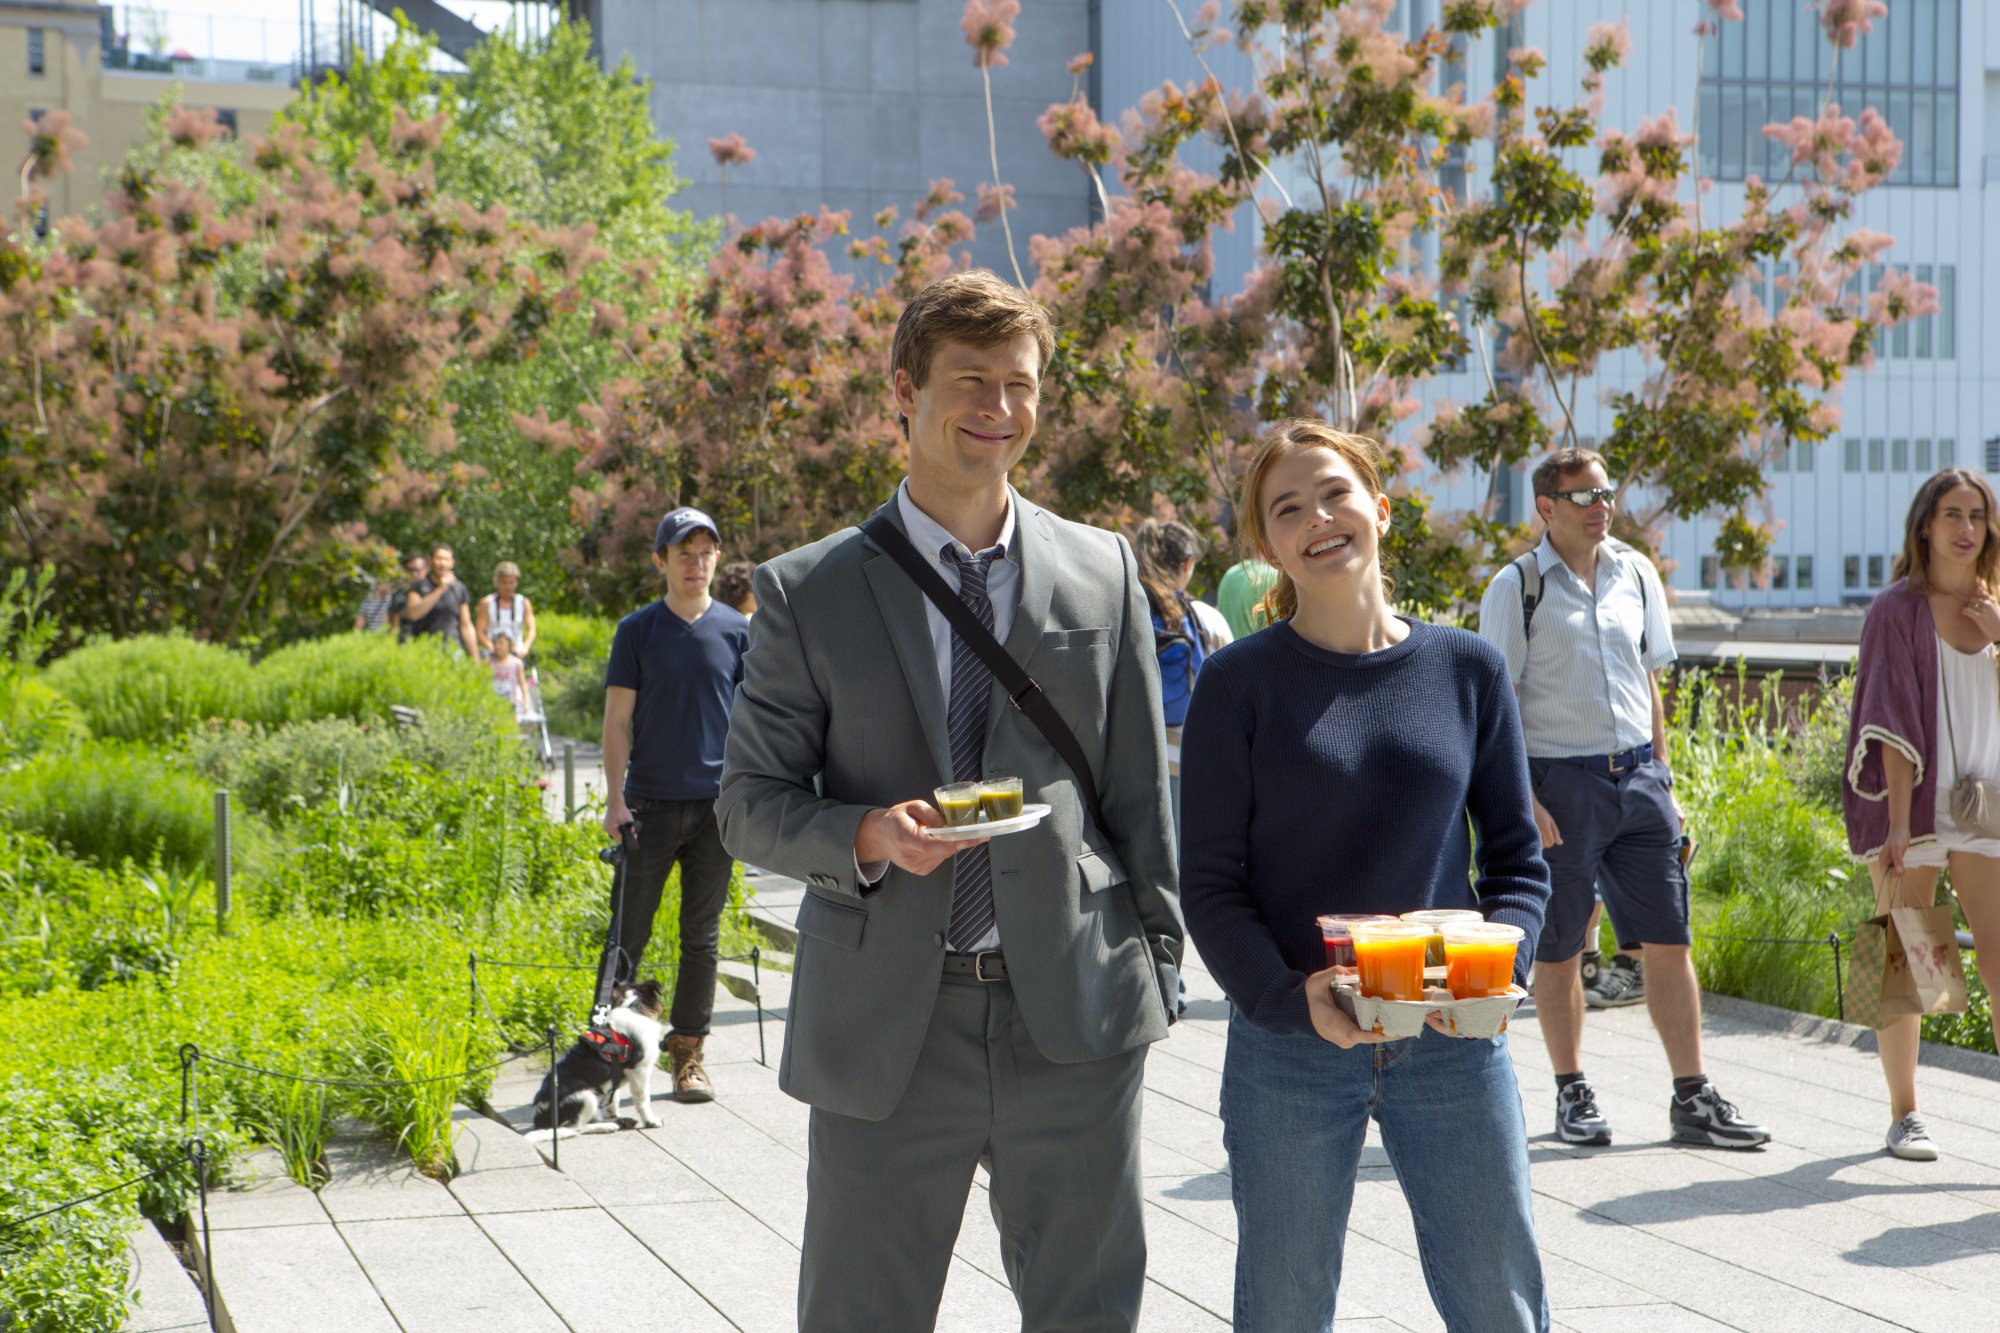 Zoey Deutch and Glen Powell stand next to each other on a path in "Set It Up."